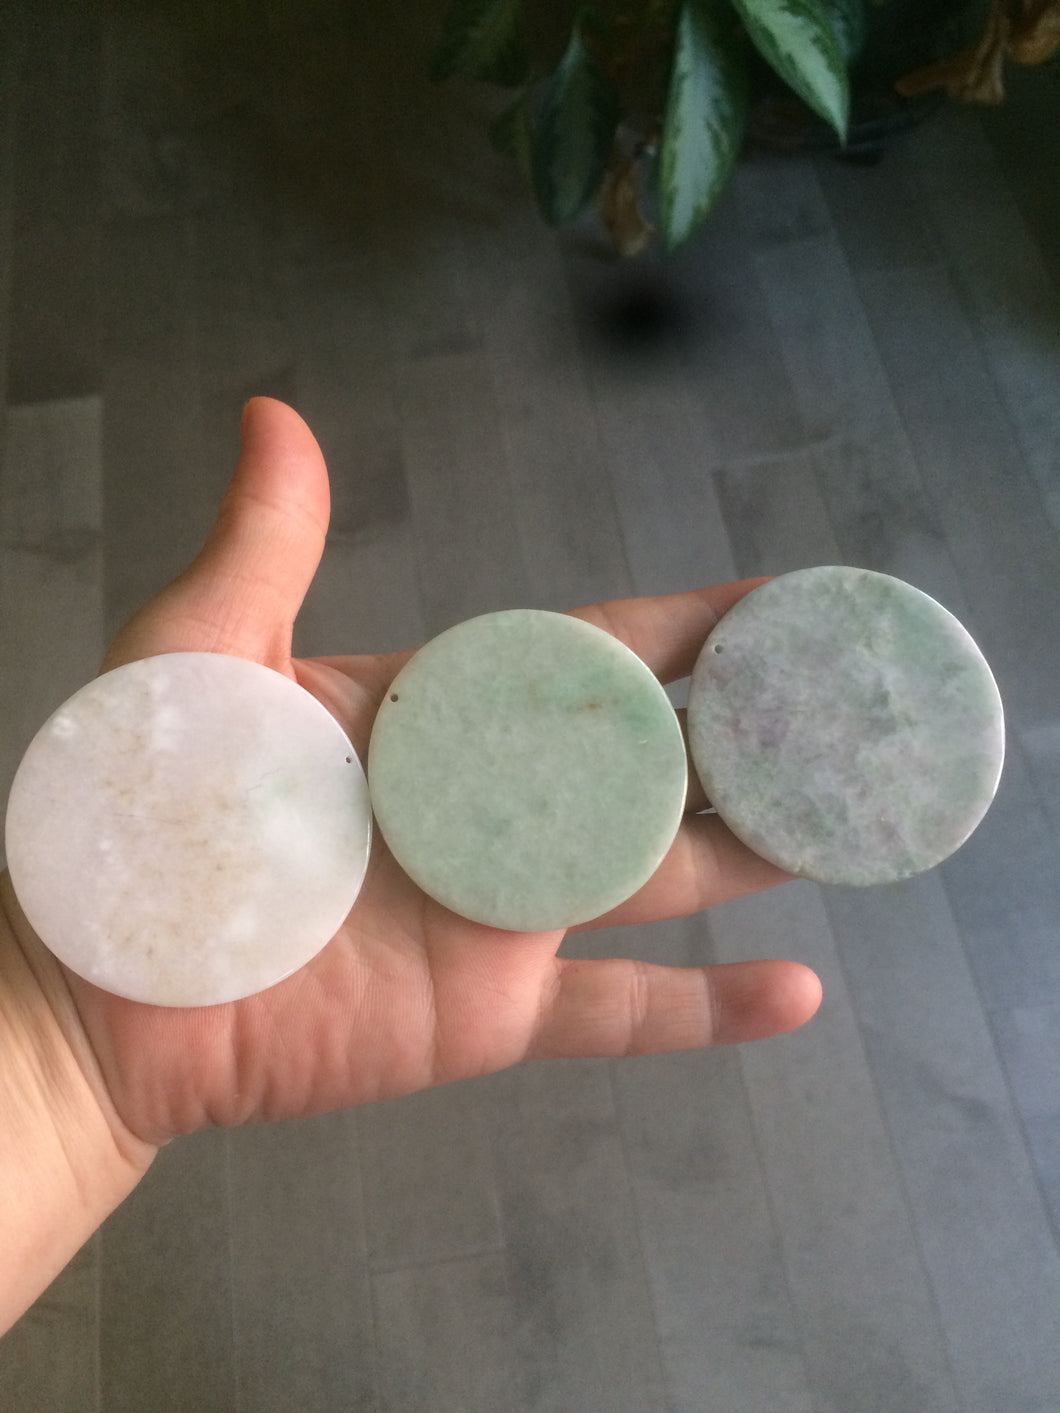 Type A 100% Natural light green/purpleJadeite Jade disc group (pendant, home decor, or worry stone) A124 add on item